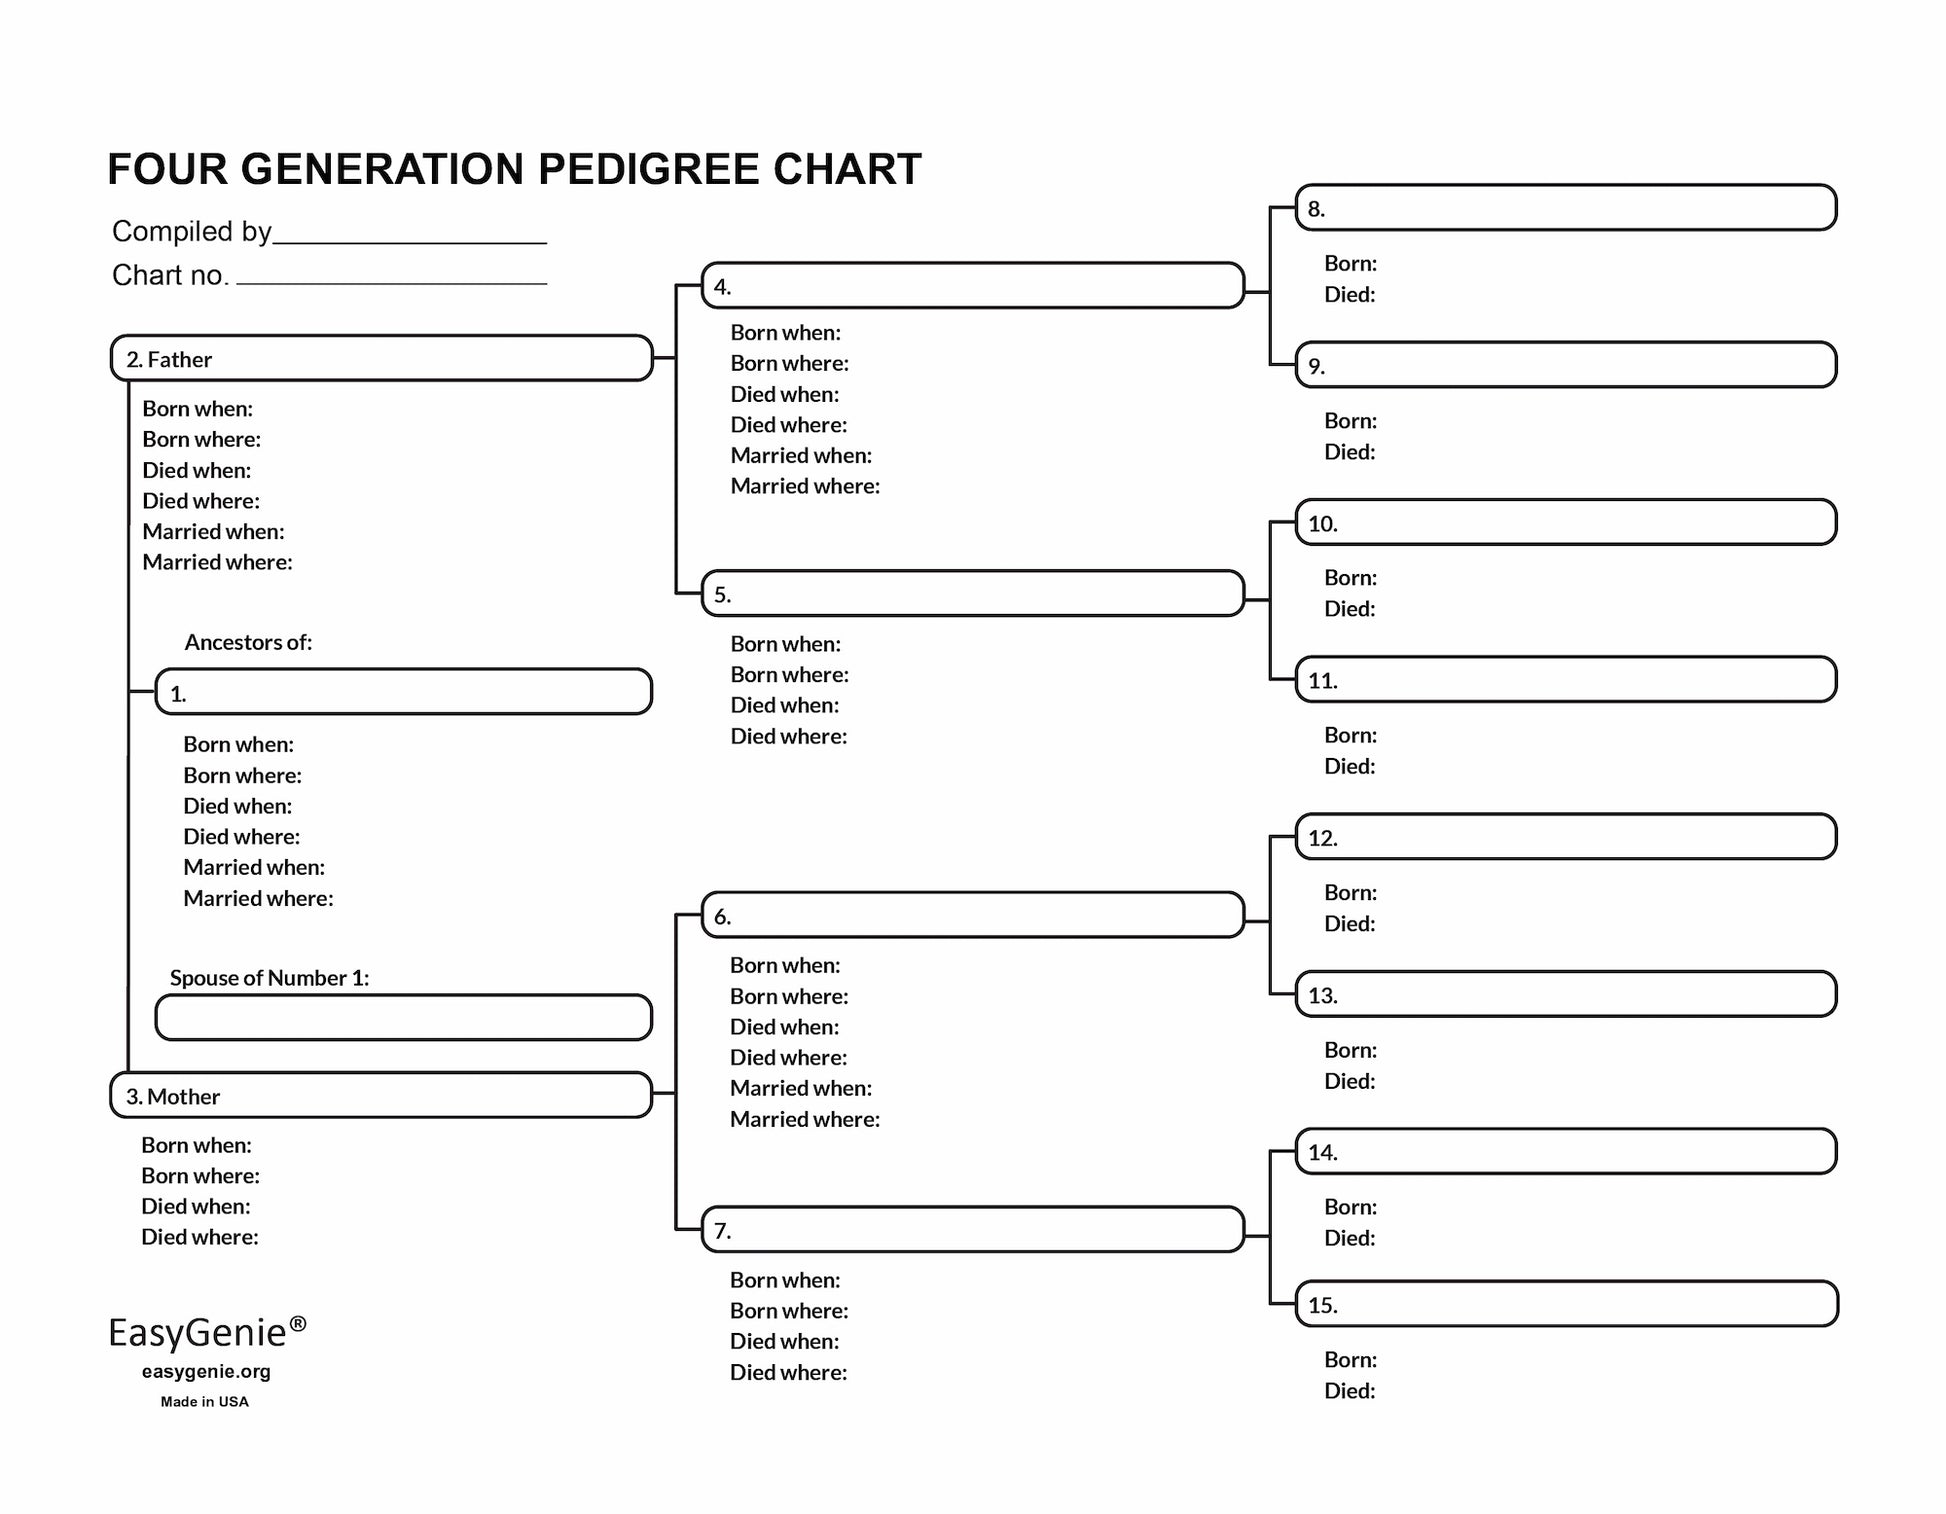 EASYGENIE Large-Print Genealogy Charts and Forms Kit (30 Sheets) Includes 10 Pedigree Charts, 10 Fan Charts, and 10 Family Group Sheets